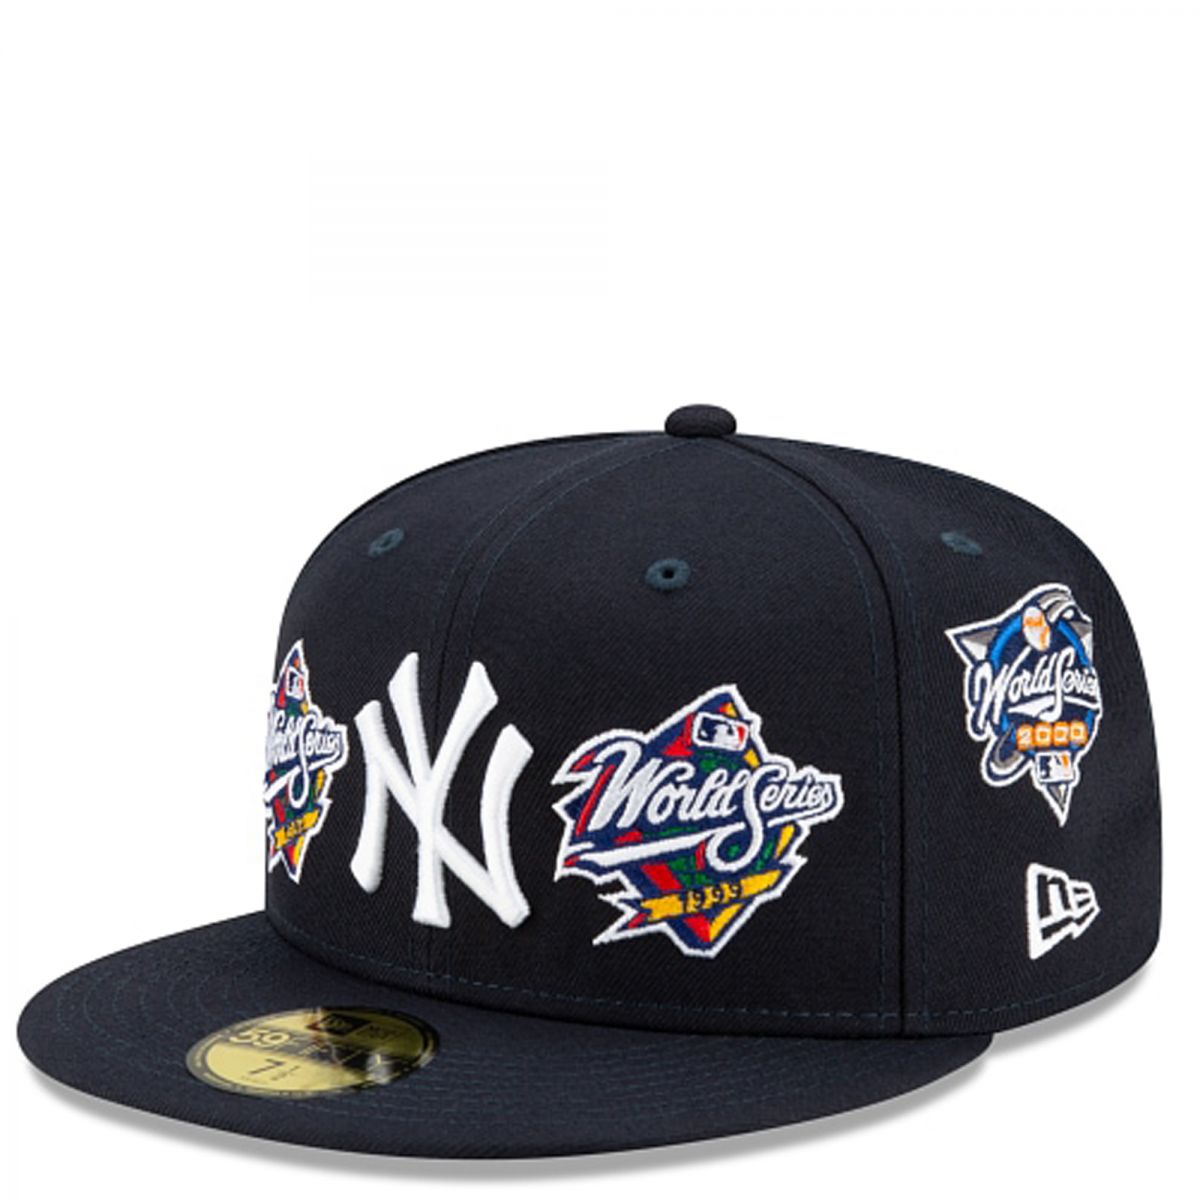 NEW ERA CAPS New York Yankees 27x World Series Champions 59Fifty Fitted Hat 60180943 - Karmaloop